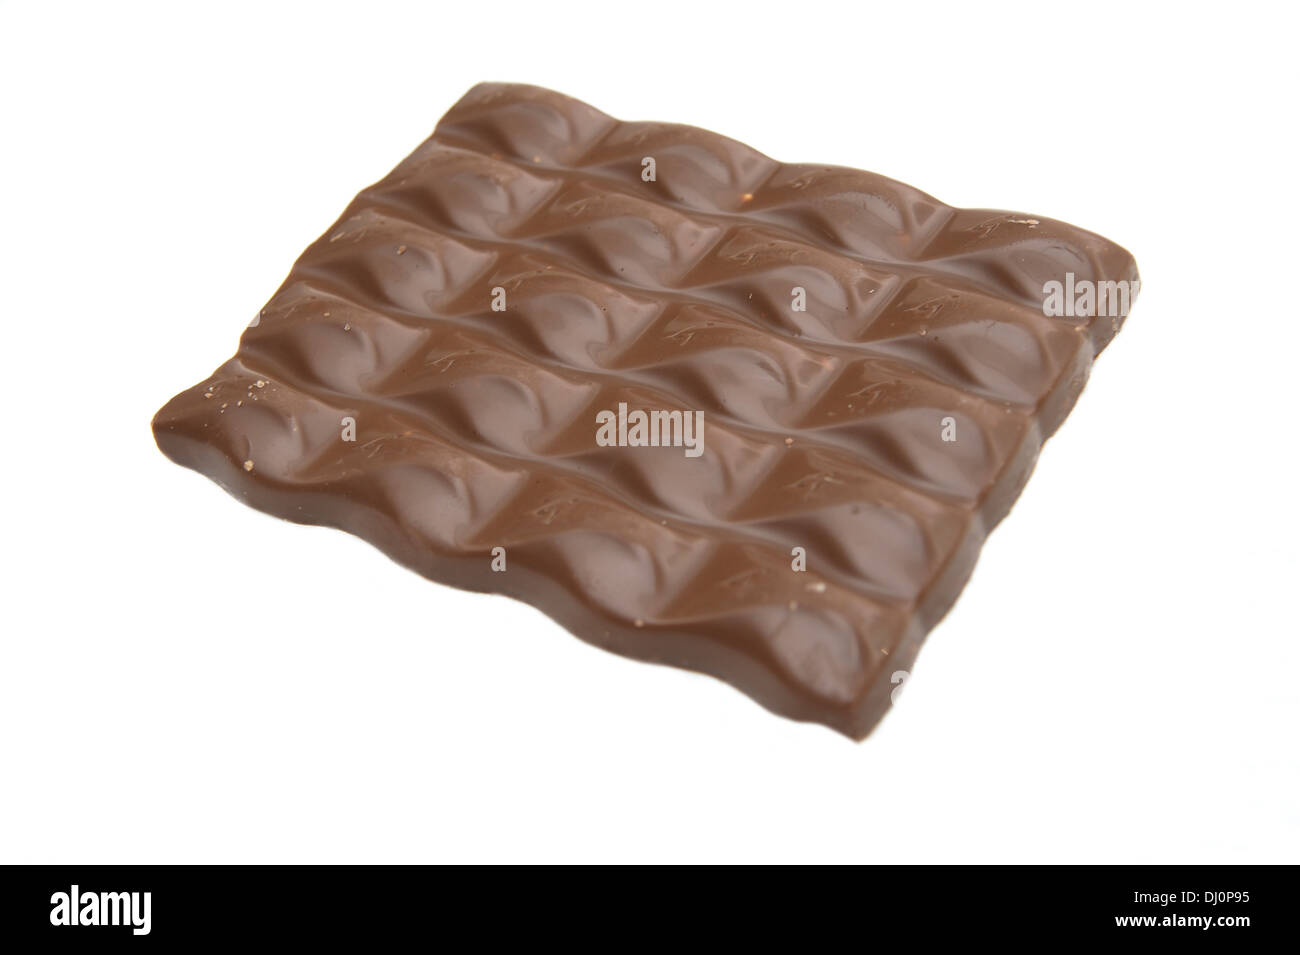 Galaxy nut chocolate bar on a white background Stock Photo